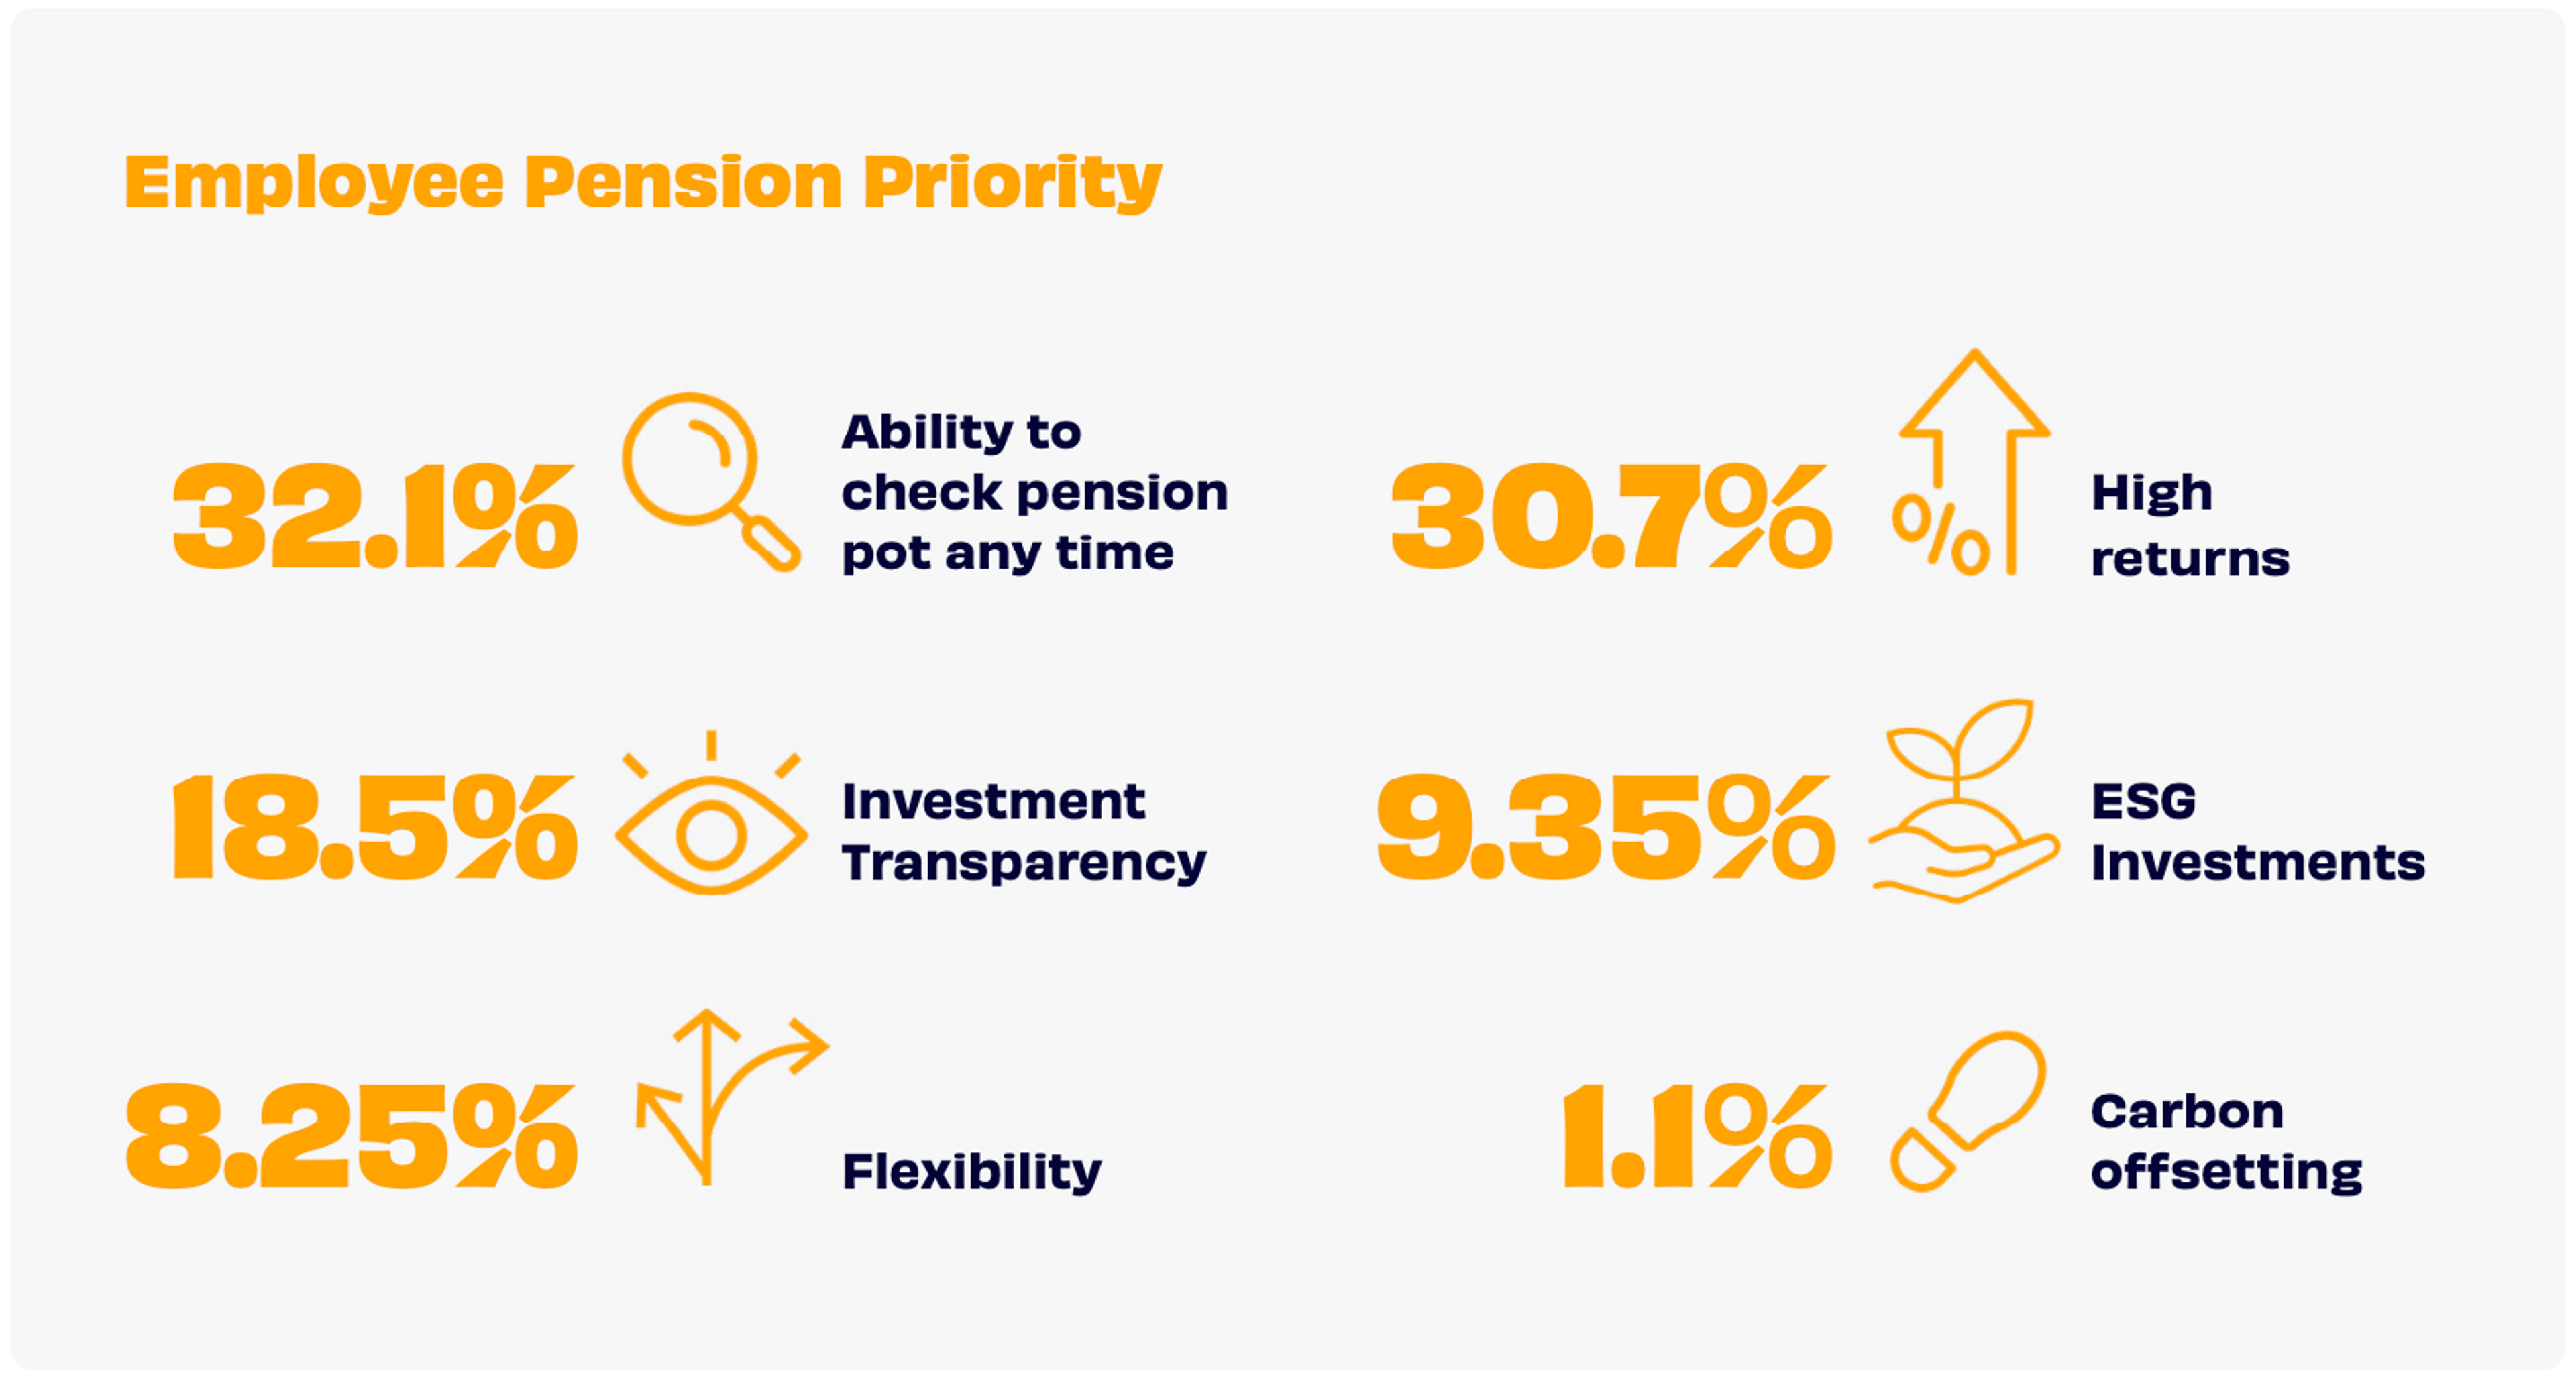 A graphic showing what features employees prioritise in their workplace pension scheme